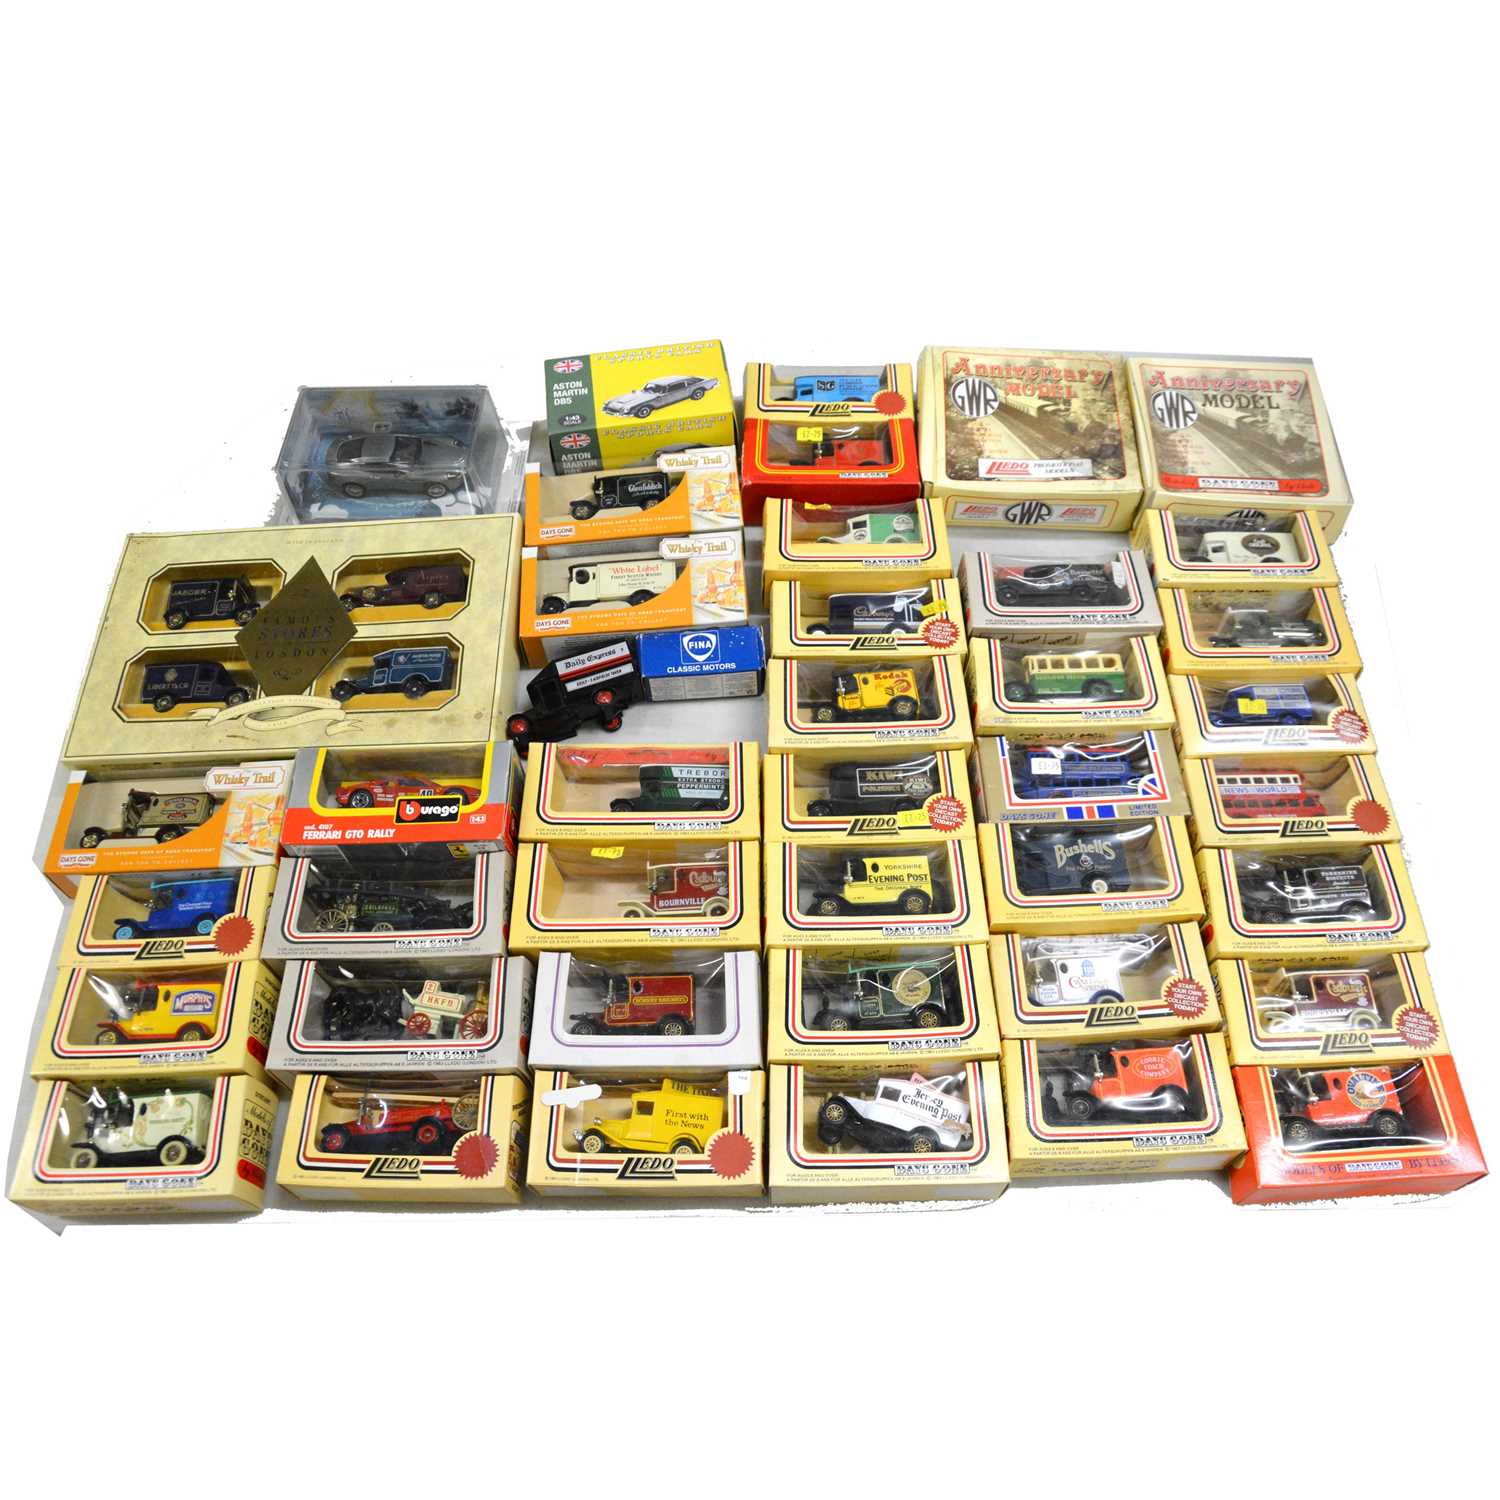 Forty-two die-cast models, mostly Lledo